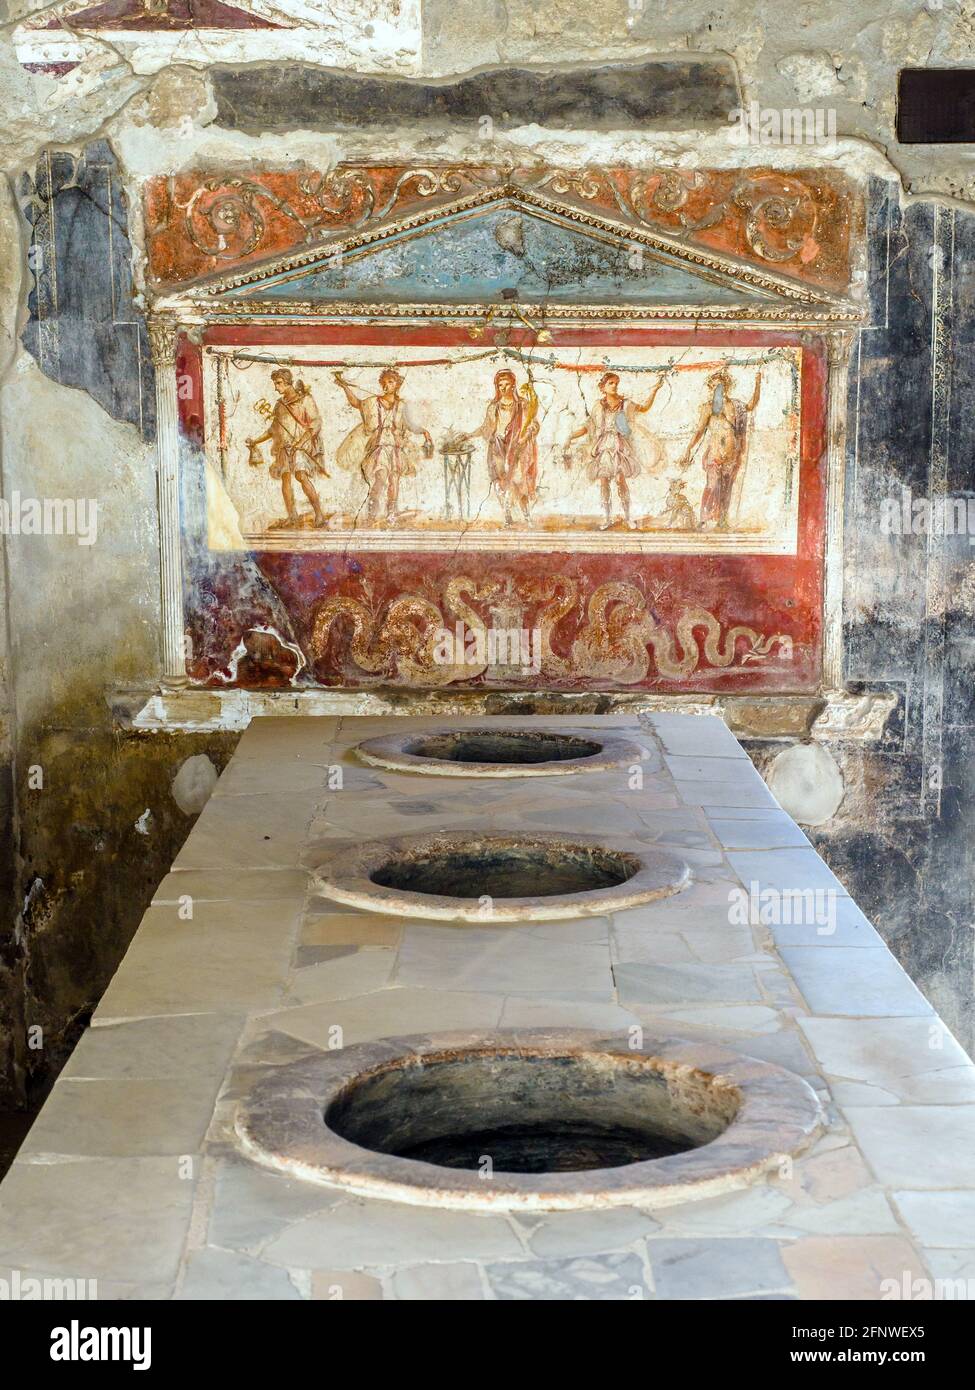 Bar area which served both food and drink. The marble counter has jars inset into the worktop which were  used to hold food. Casa e Thermopolium di Vetutius Placidus (thermopolium and house of Vetutius Placidus) - Pompeii archaeological site, Italy Stock Photo